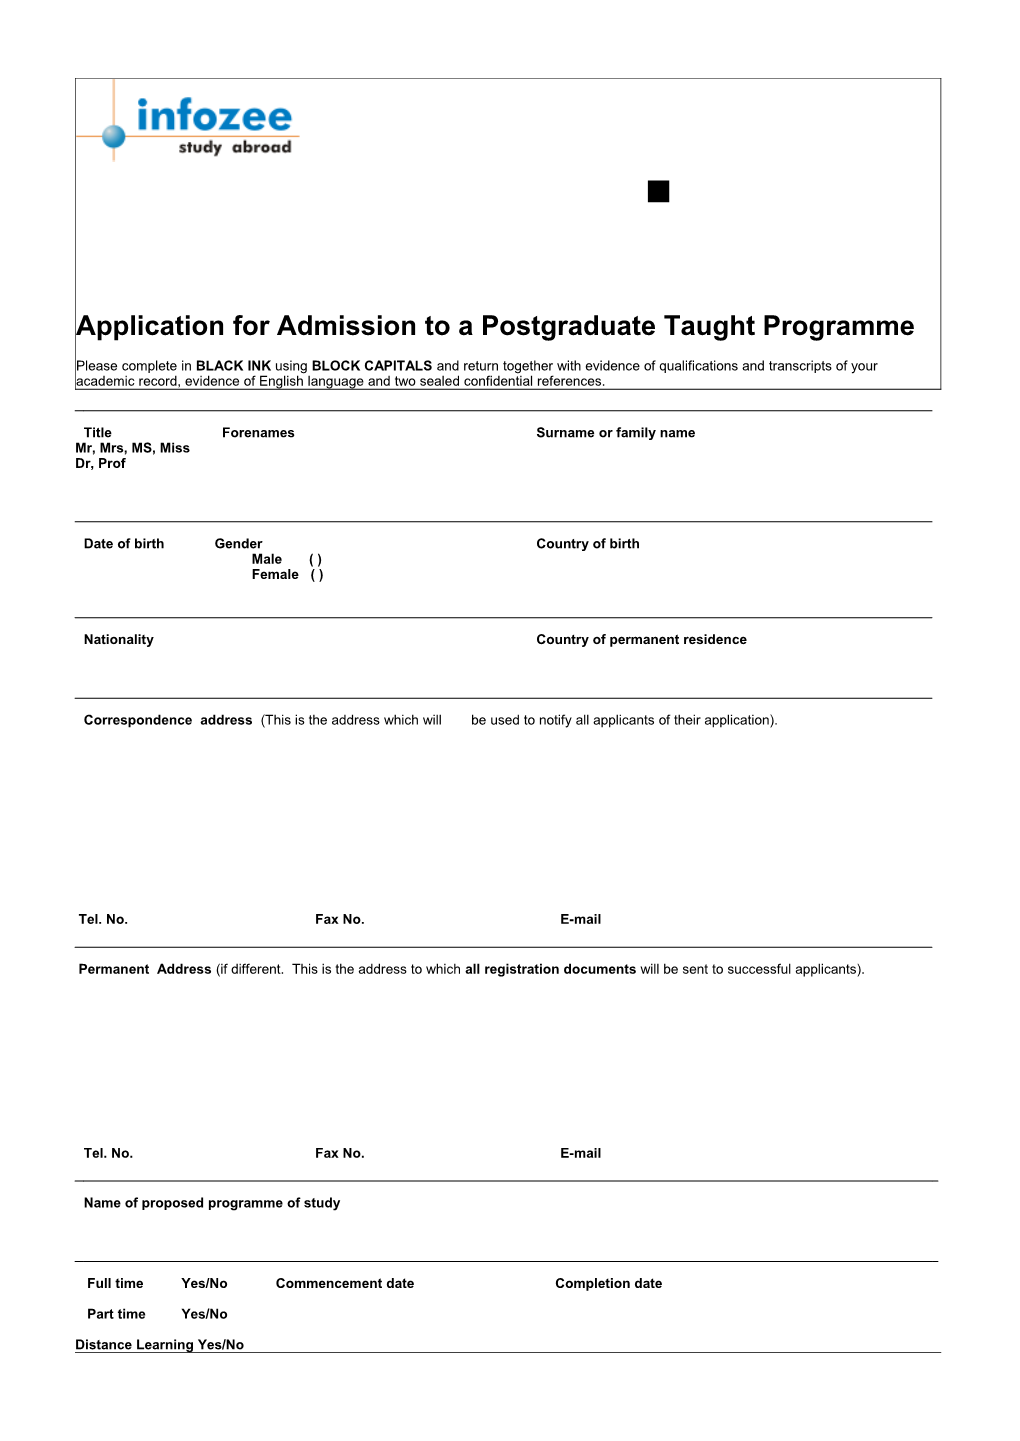 Application for Admission to a Postgraduate Taught Programme